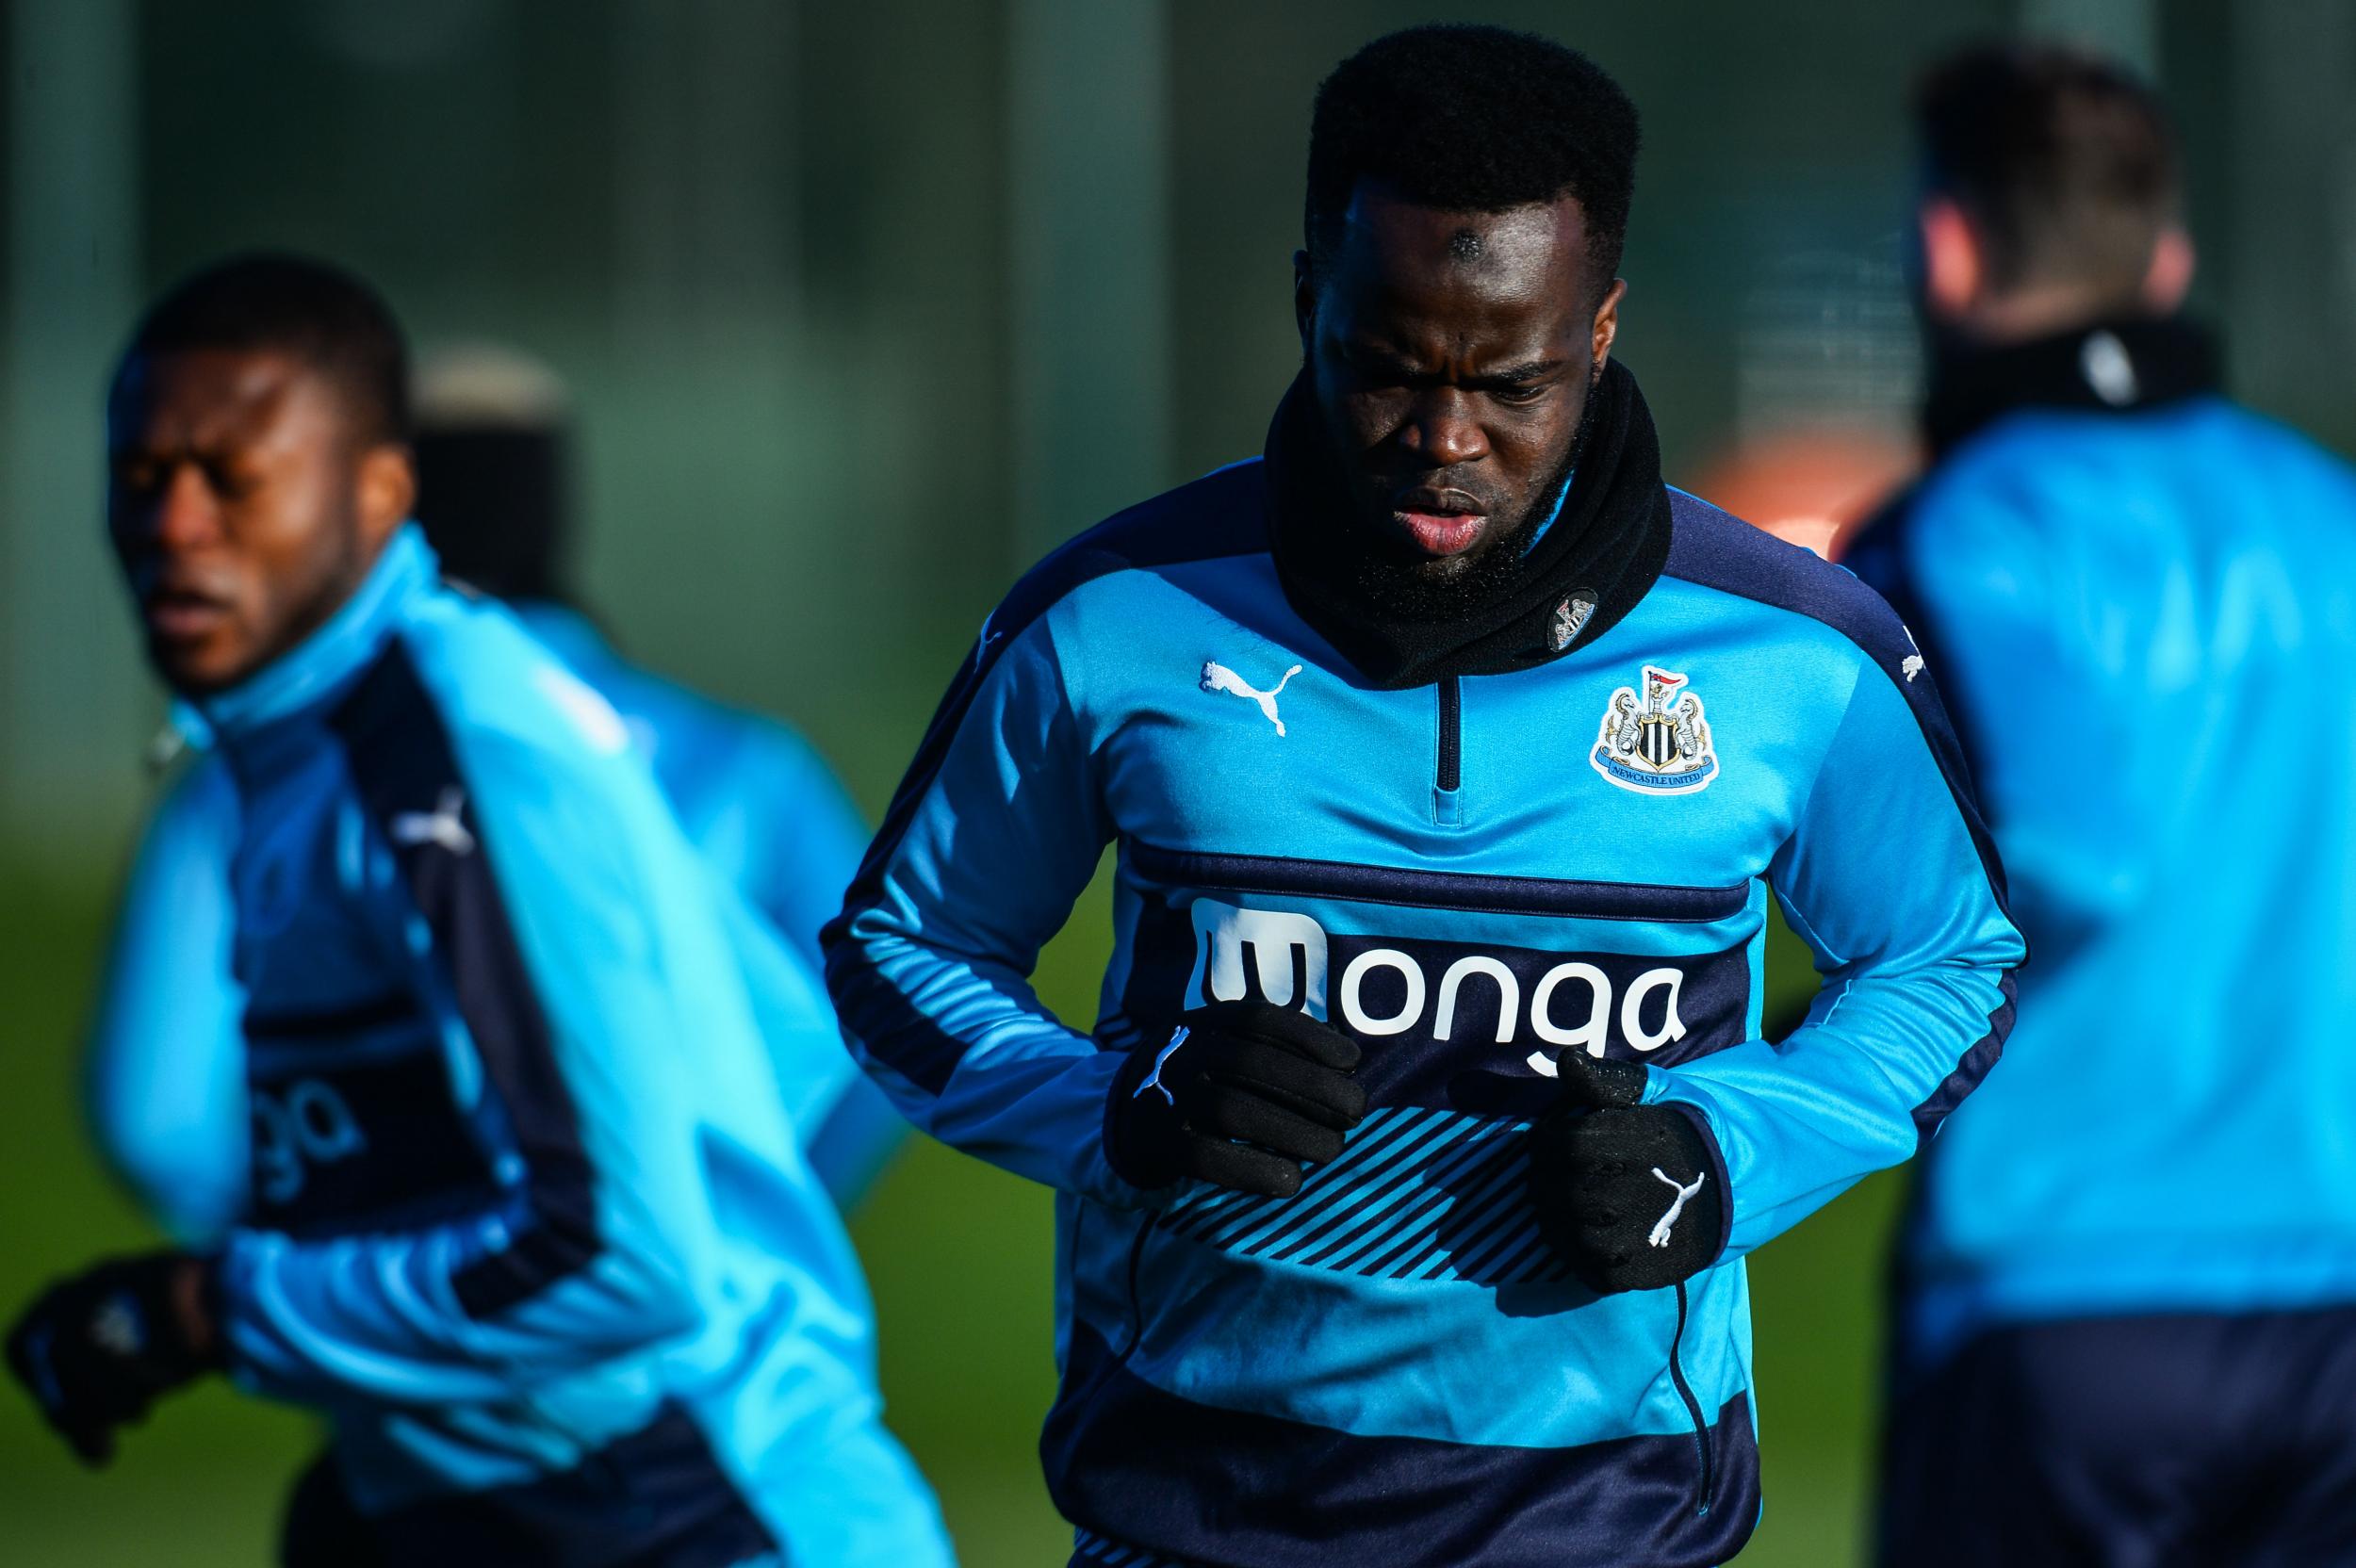 Football has come together to pay tribute to Tiote